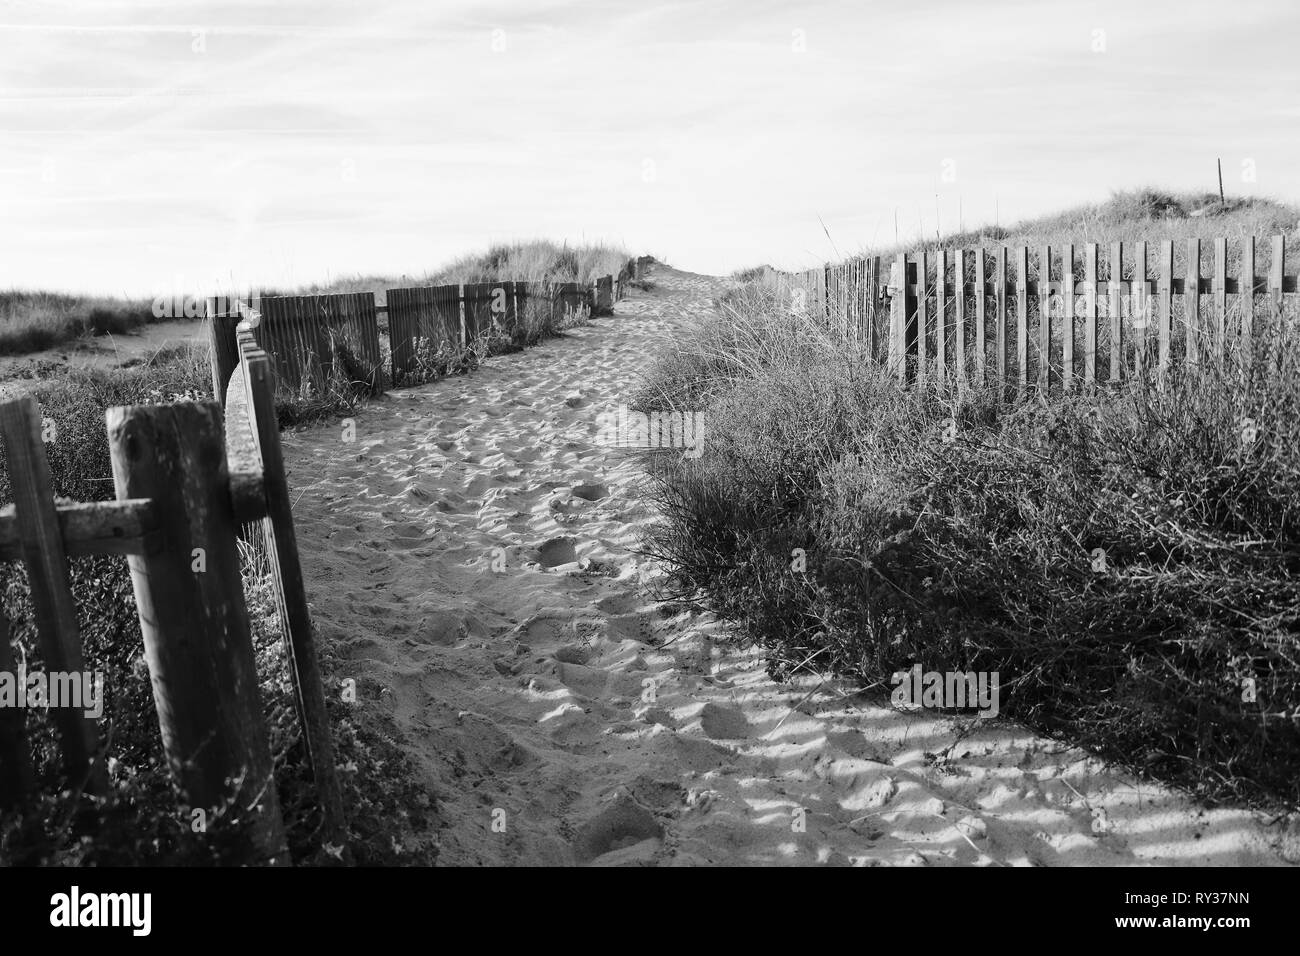 Path to the beach through the dunes surrounded by a wood fence Stock Photo